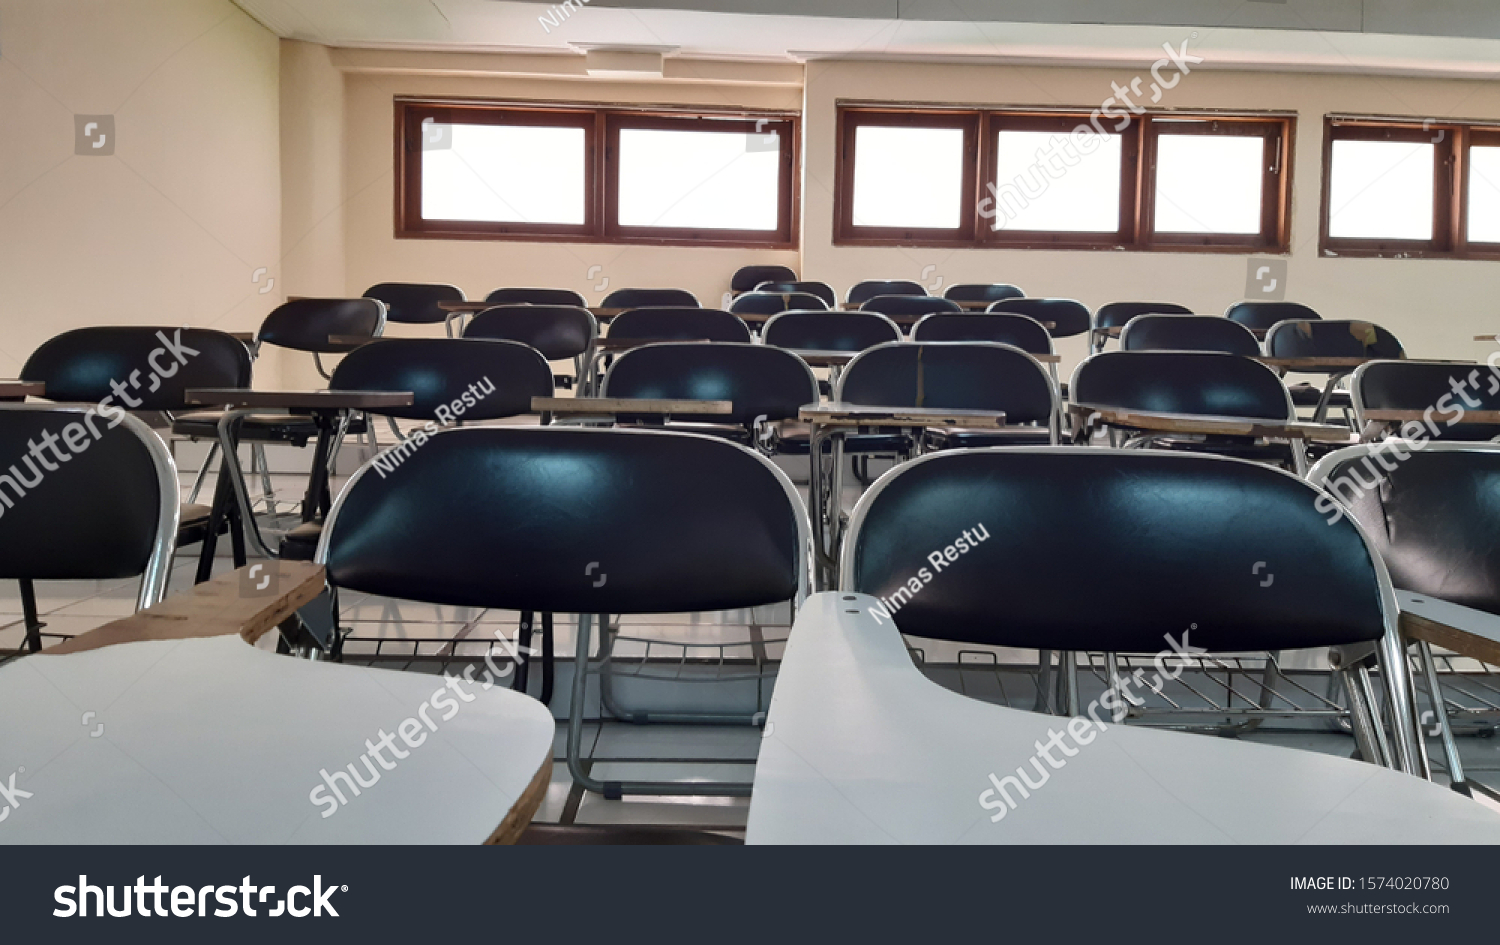 college classroom for college student in Indonesia with basic chairs #1574020780